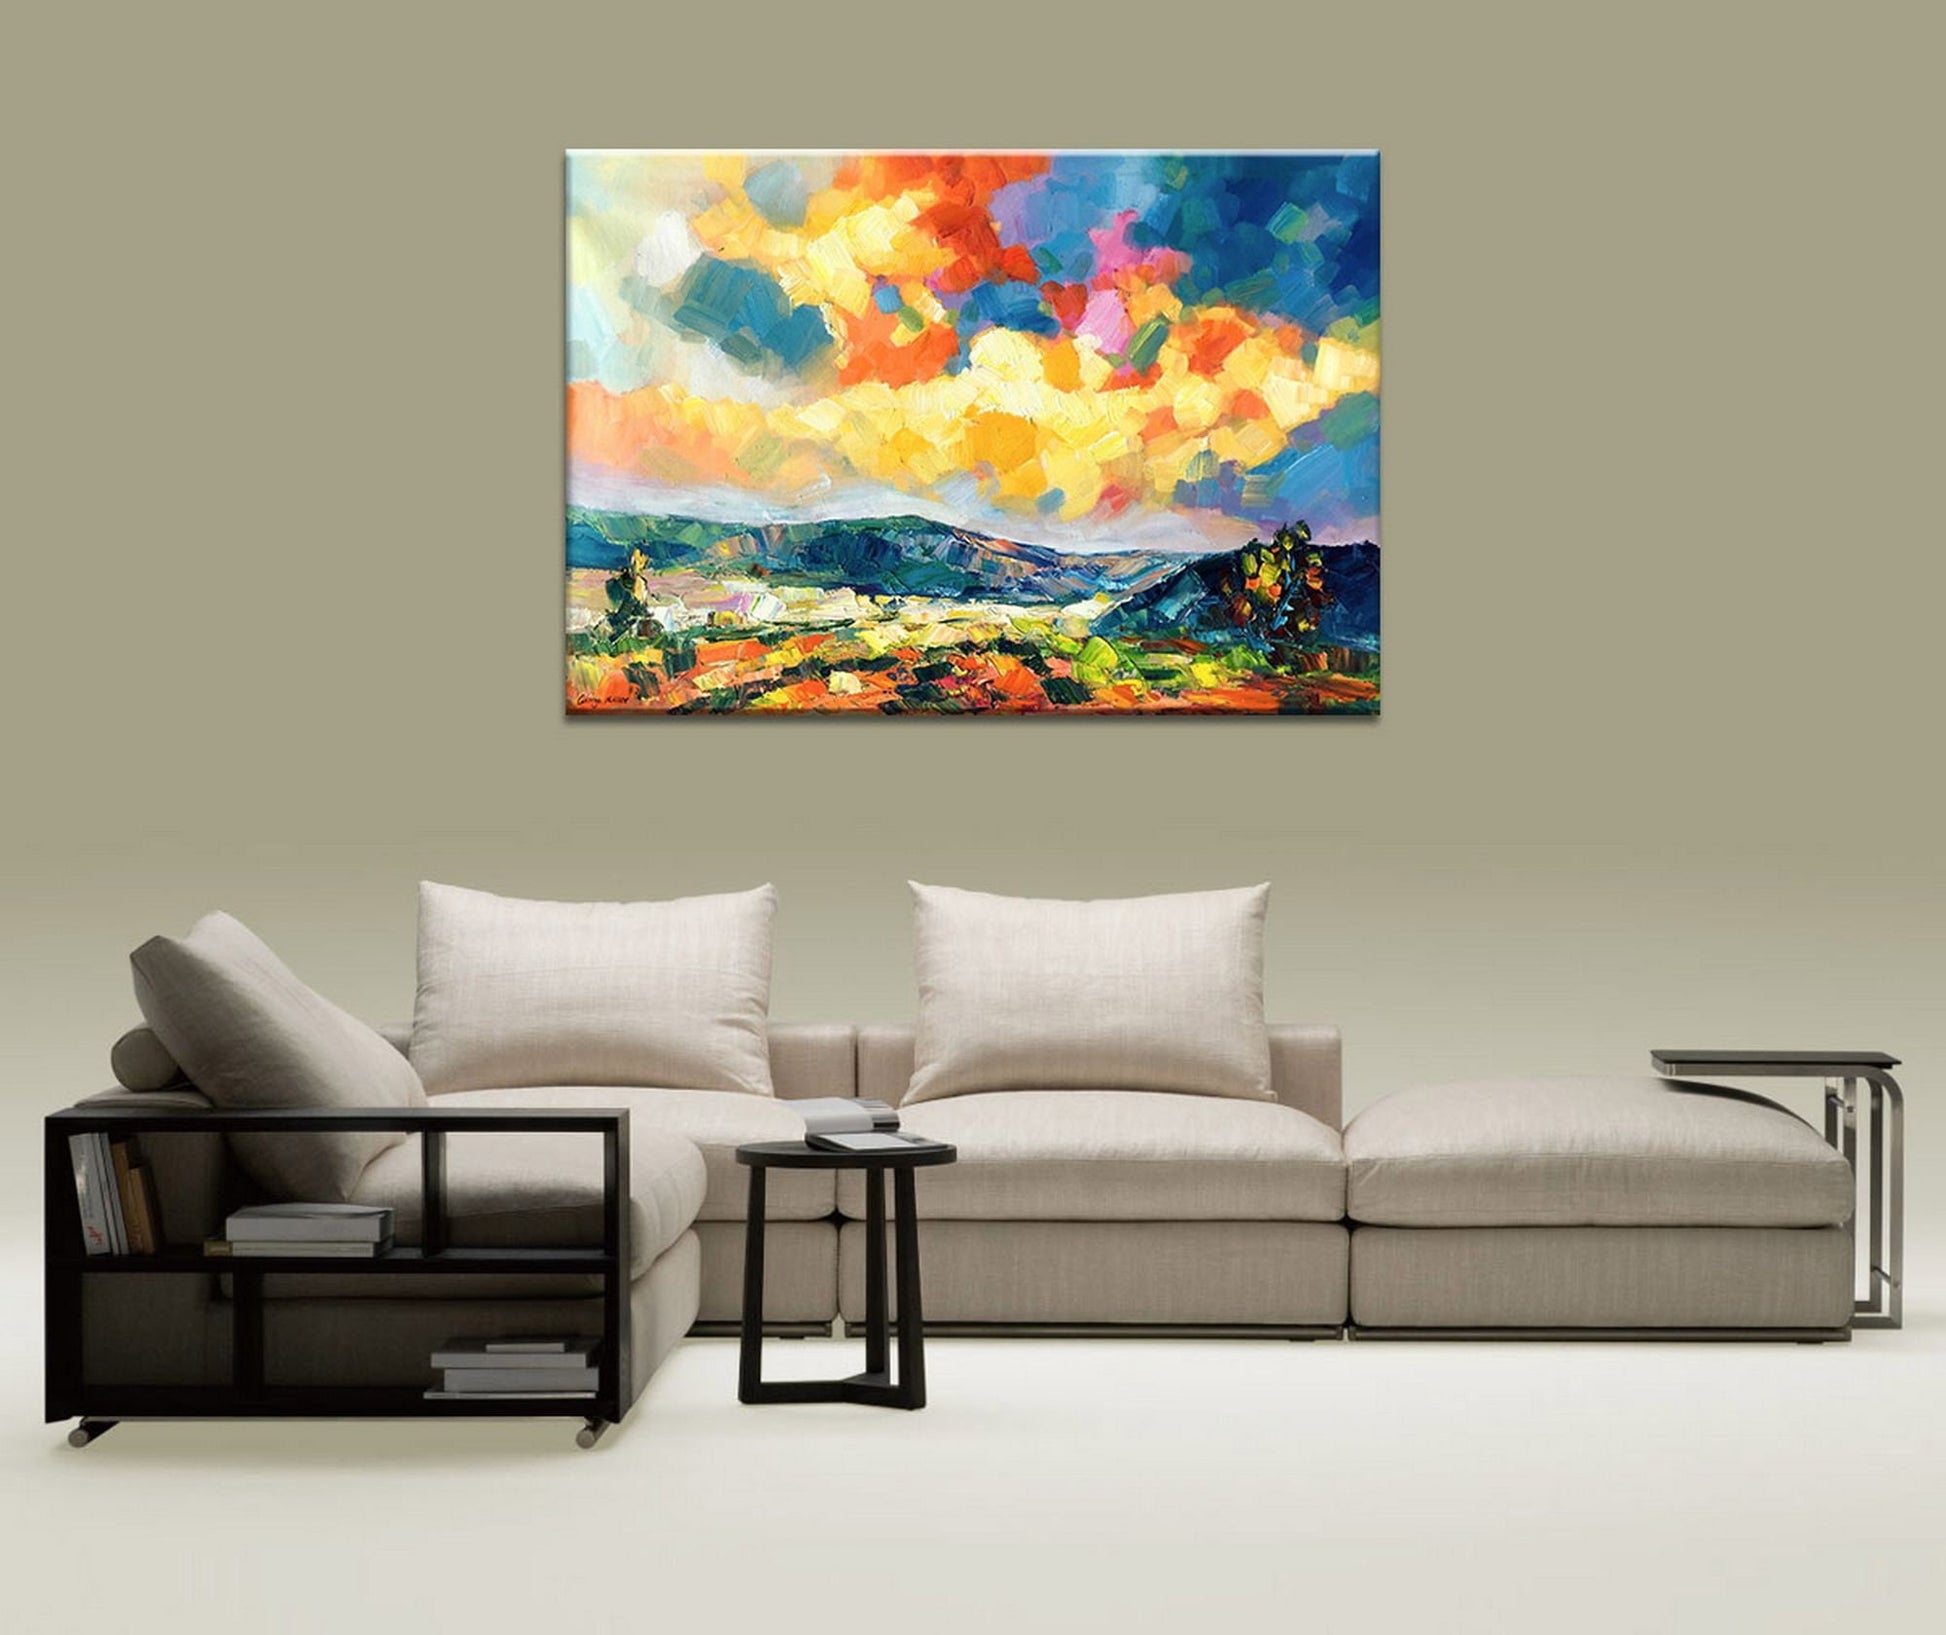 Landscape Oil Painting, Large Abstract Art, Coffee Wall Art, Living Room Decor, Original Art, Modern Art, Abstract Canvas Painting Skyscape